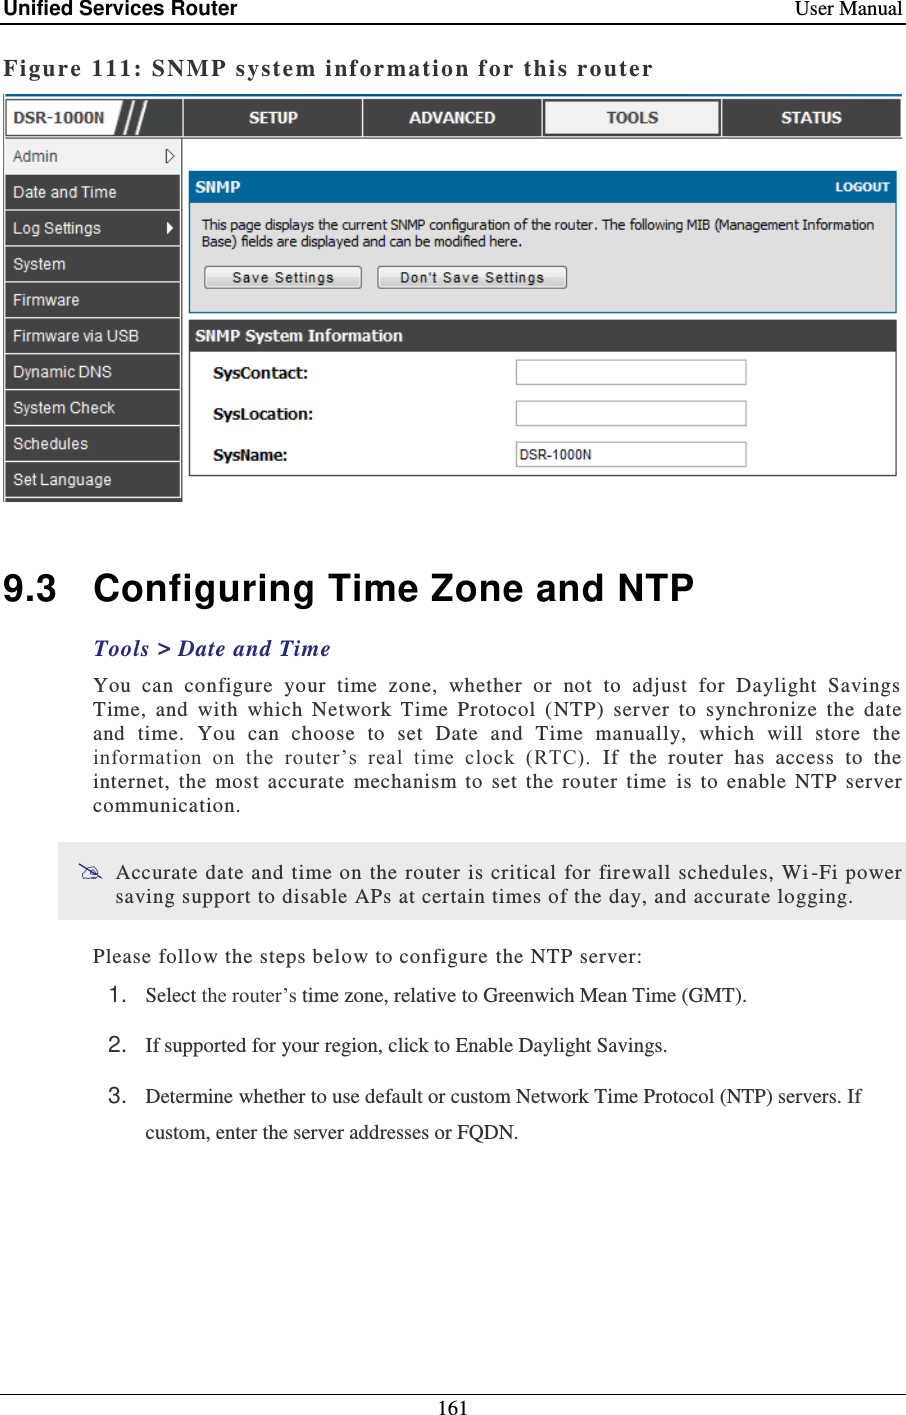 Unified Services Router    User Manual 161  Figure 111:  SNMP system information f or this router    9.3  Configuring Time Zone and NTP Tools &gt; Date and Time You  can  configure  your  time  zone,  whether  or  not  to  adjust  for  Daylight  Savings Time,  and  with  which  Network  Time  Protocol  (NTP)  server  to  synchronize  the  date and  time.  You  can  choose  to  set  Date  and  Time  manually,  which  will  store  the information  on  the  router’s  real  time  clock  (RTC).  If  the  router  has  access  to  the internet,  the  most  accurate  mechanism  to  set  the  router  time   is  to  enable  NTP  server communication.   Accurate date and time on  the router is critical for firewall schedules, Wi -Fi power saving support to disable APs at certain times of the day, and accurate logging.   Please follow the steps below to configure  the NTP server: 1. Select the router’s time zone, relative to Greenwich Mean Time (GMT). 2. If supported for your region, click to Enable Daylight Savings. 3. Determine whether to use default or custom Network Time Protocol (NTP) servers. If custom, enter the server addresses or FQDN. 